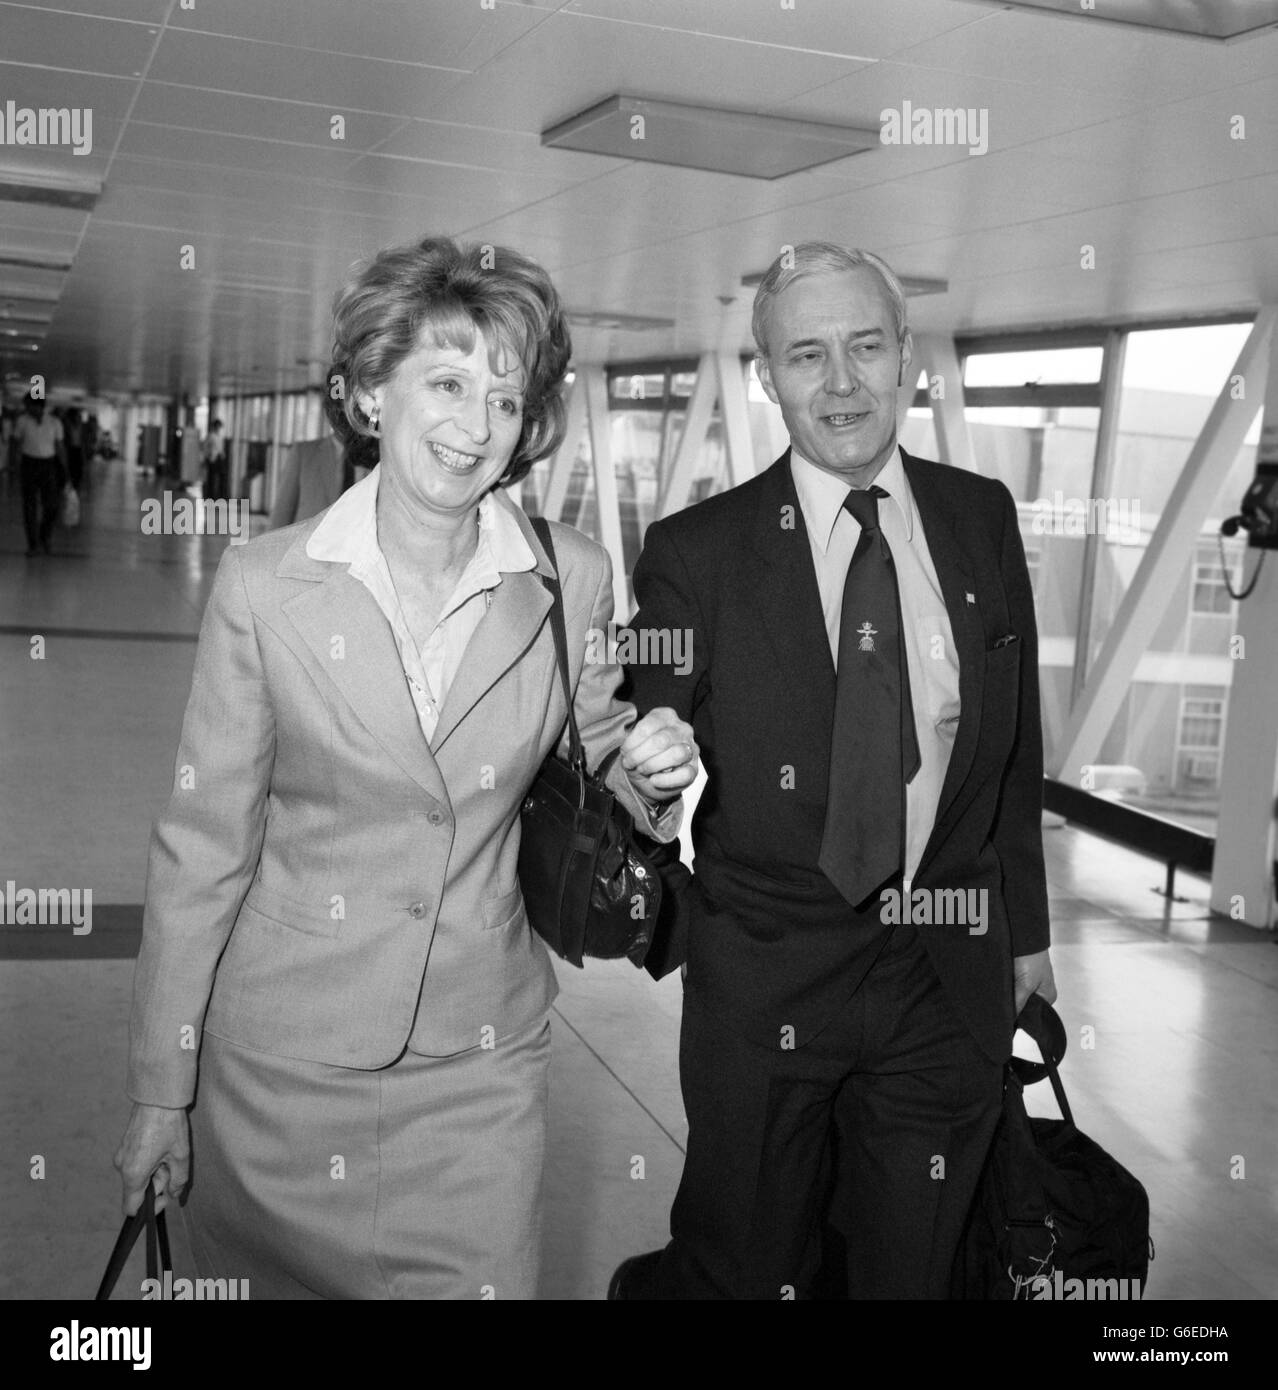 Labour MP, Mr Tony Benn, and his American-born-wife, Caroline, at Heathrow airport, London, prior to flying out to New York, where Benn is due to make a speech at the Smith and Hobart College in Geneva, New York State. He is expected to claim strong support in Britain for an unconditional and immediate cease fire in the Falklands conflict. Stock Photo